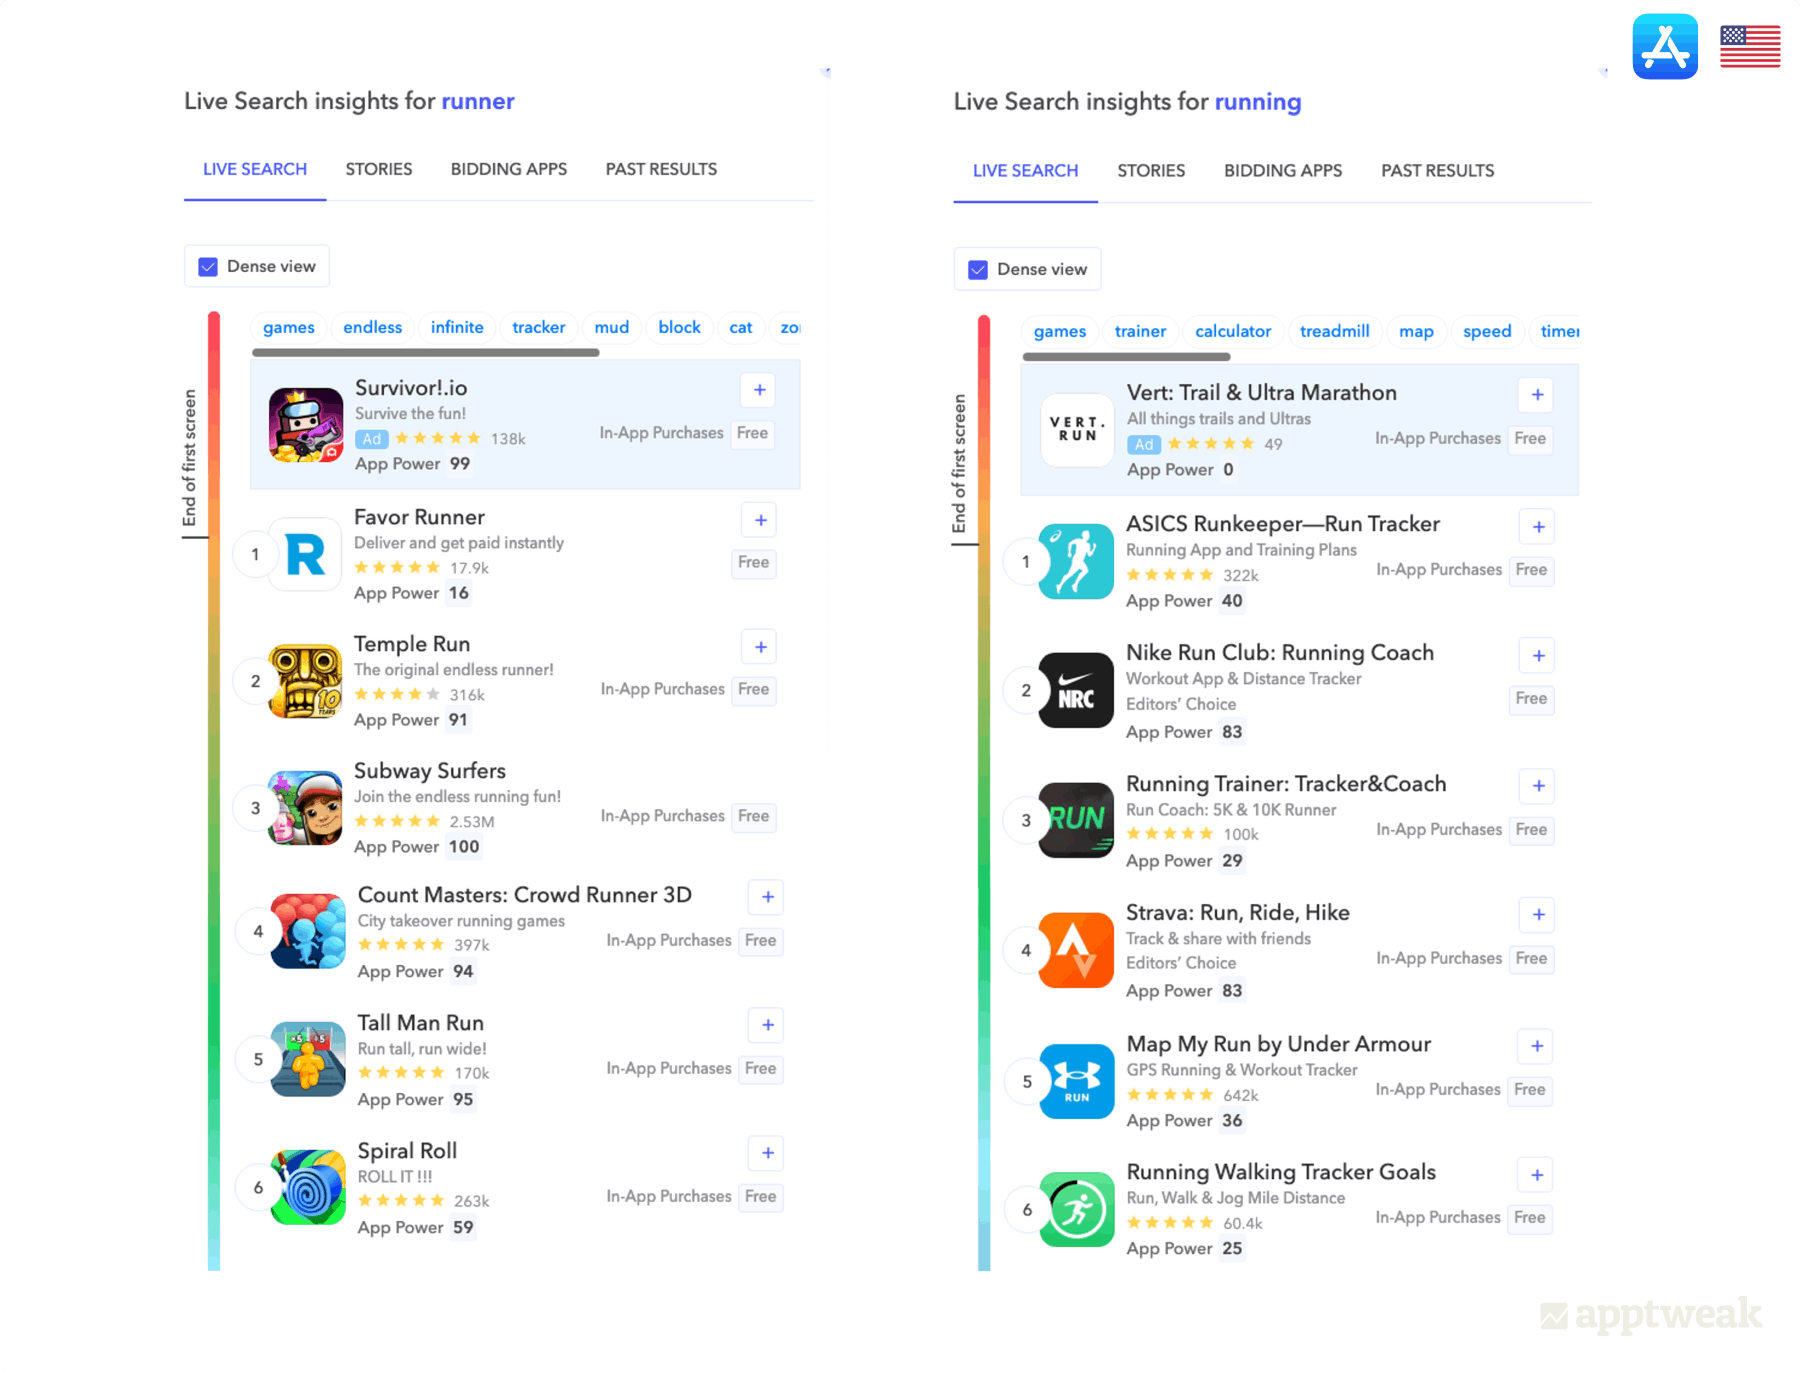 Comparing the search results on the keywords "runner" and "running" - iOS US